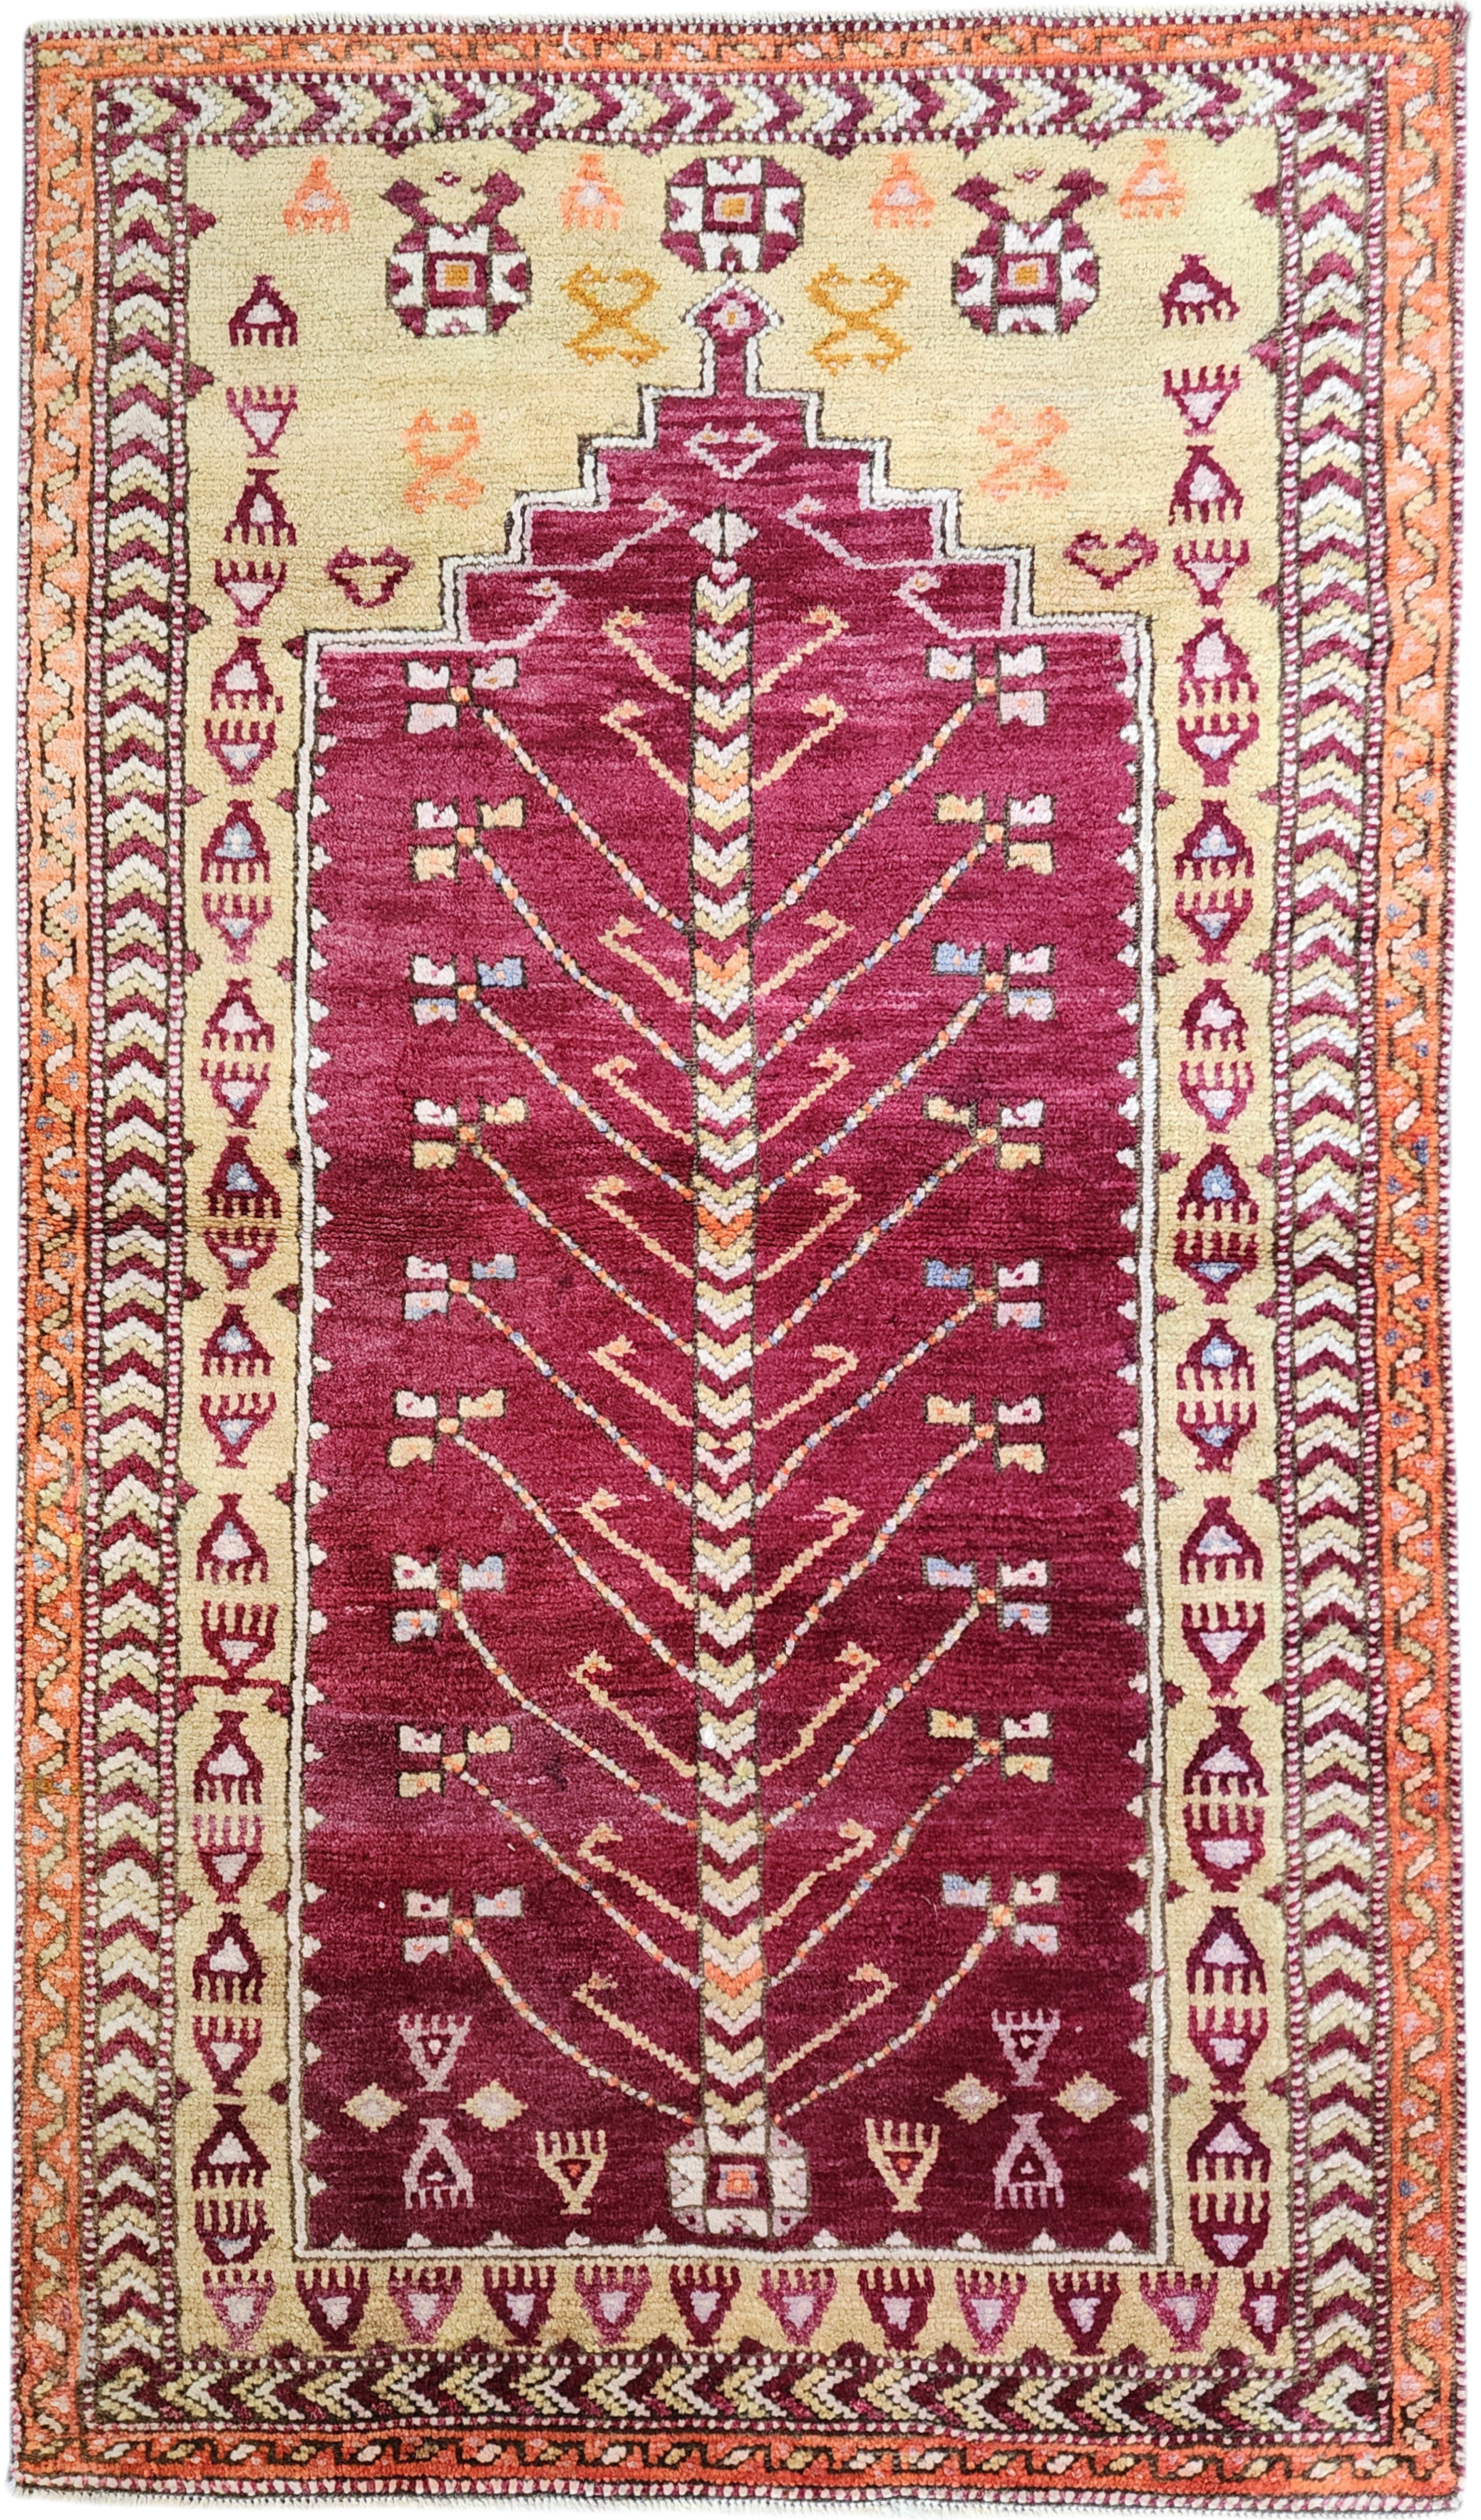 Antique Turkish Rug, 5 ft 5 in x 3 ft 6 in, Red, Green and Yellow Tree of Life Motif Turkish Carpet Handmade in Adana from Natural Wool